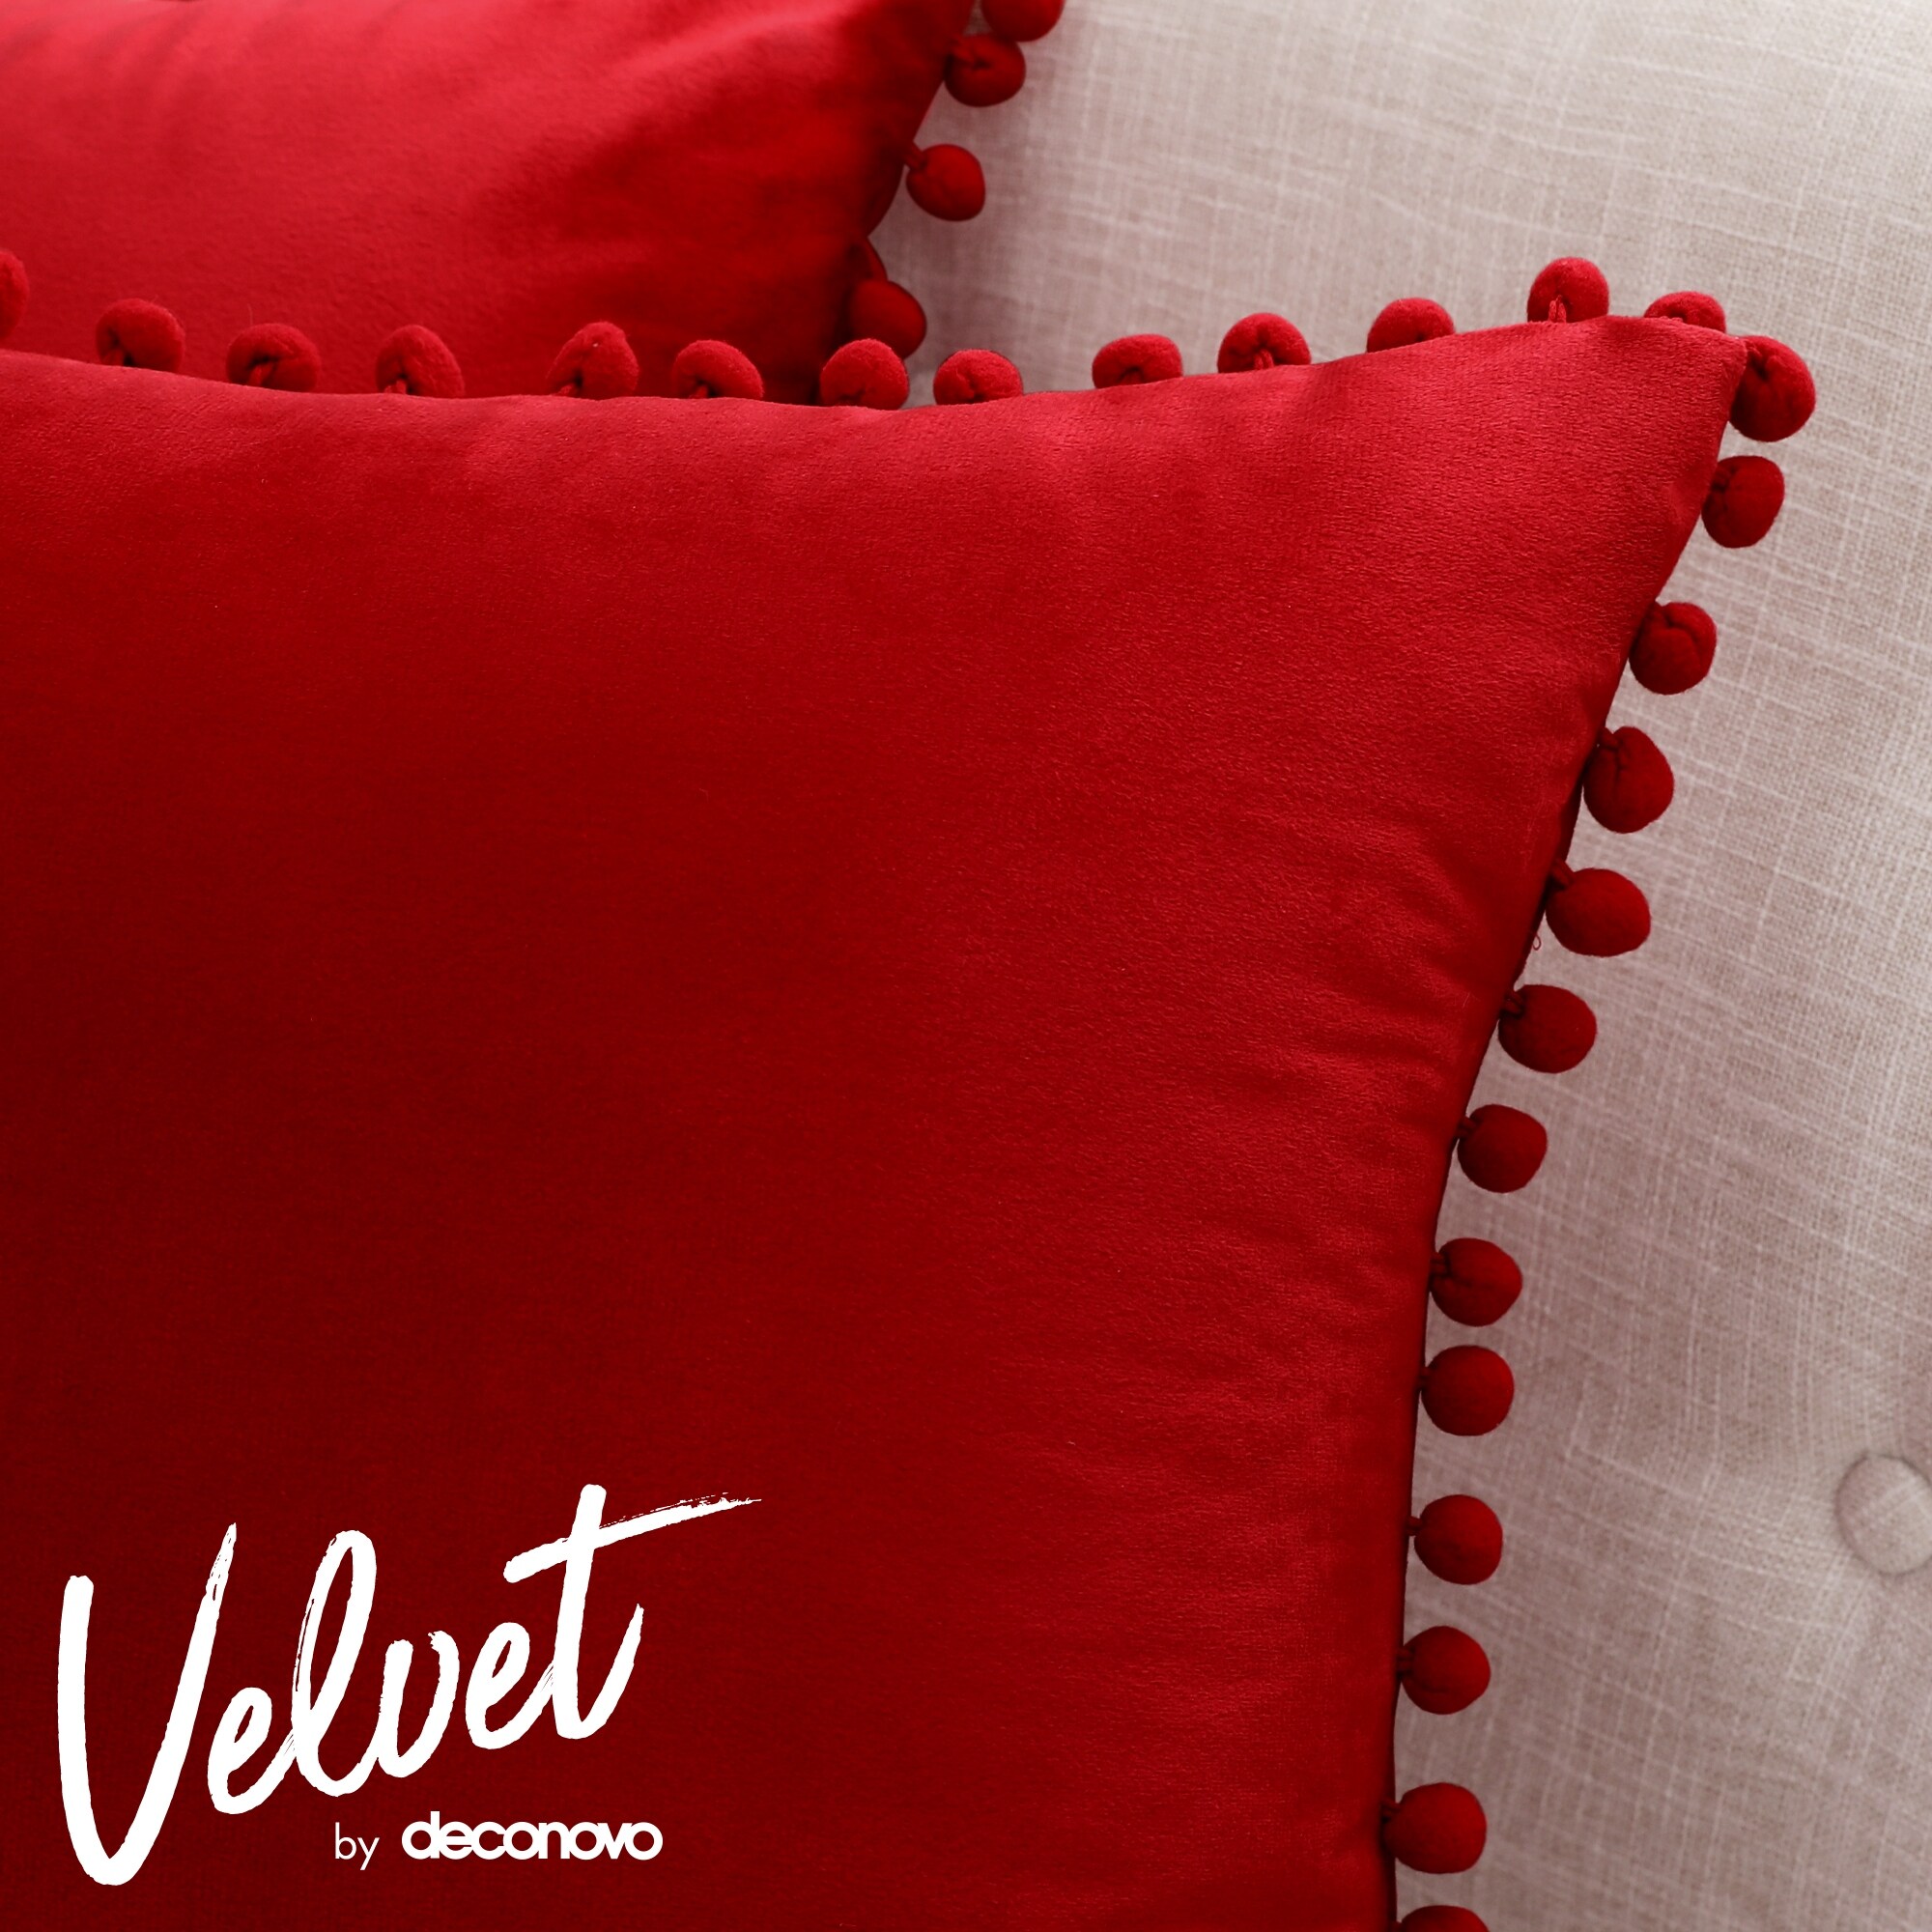 https://ak1.ostkcdn.com/images/products/is/images/direct/24aa12286f96049374048b528b59afa38af62c79/Deconovo-Velvet-Pom-poms-Throw-Pillow-Covers-2-Pieces.jpg